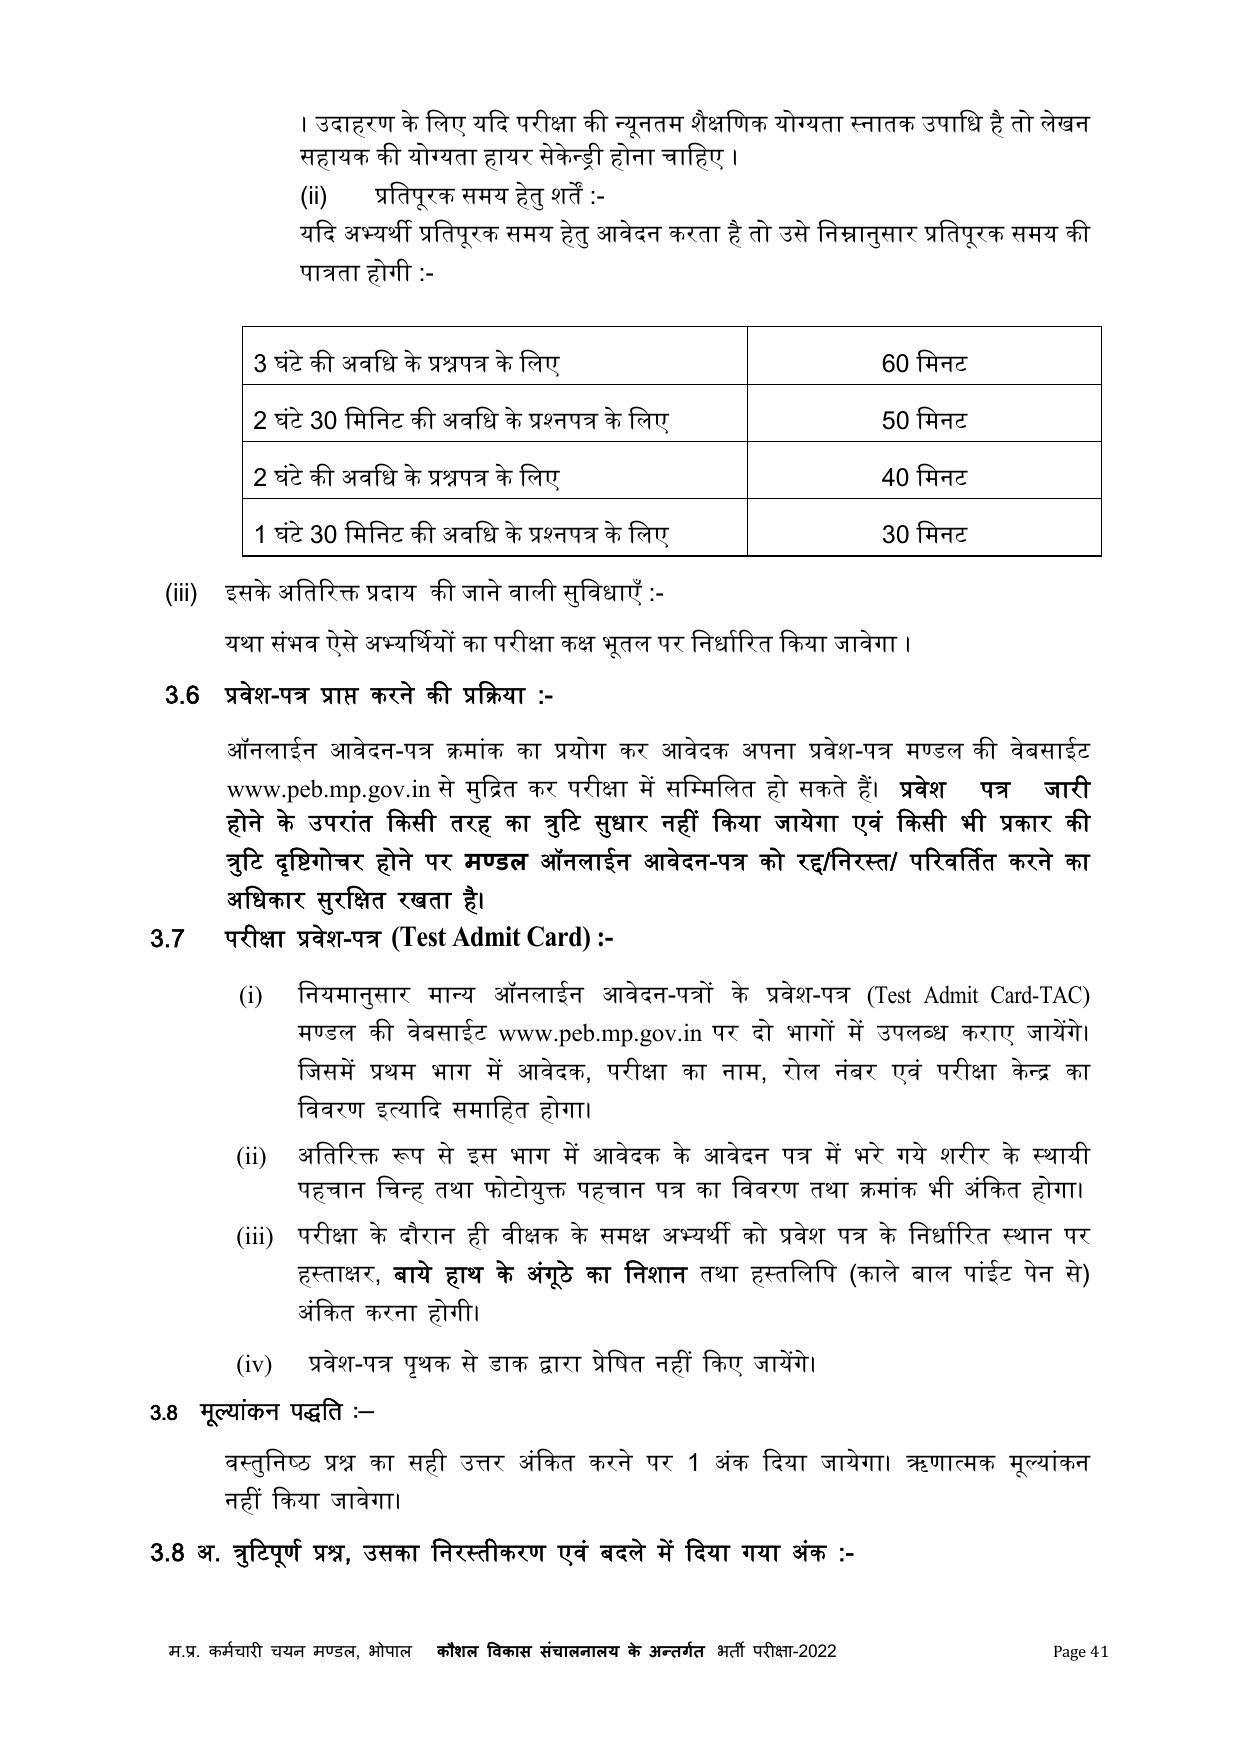 MPPEB Invites Application for 305 ITI Training Officer Recruitment 2022 - Page 30